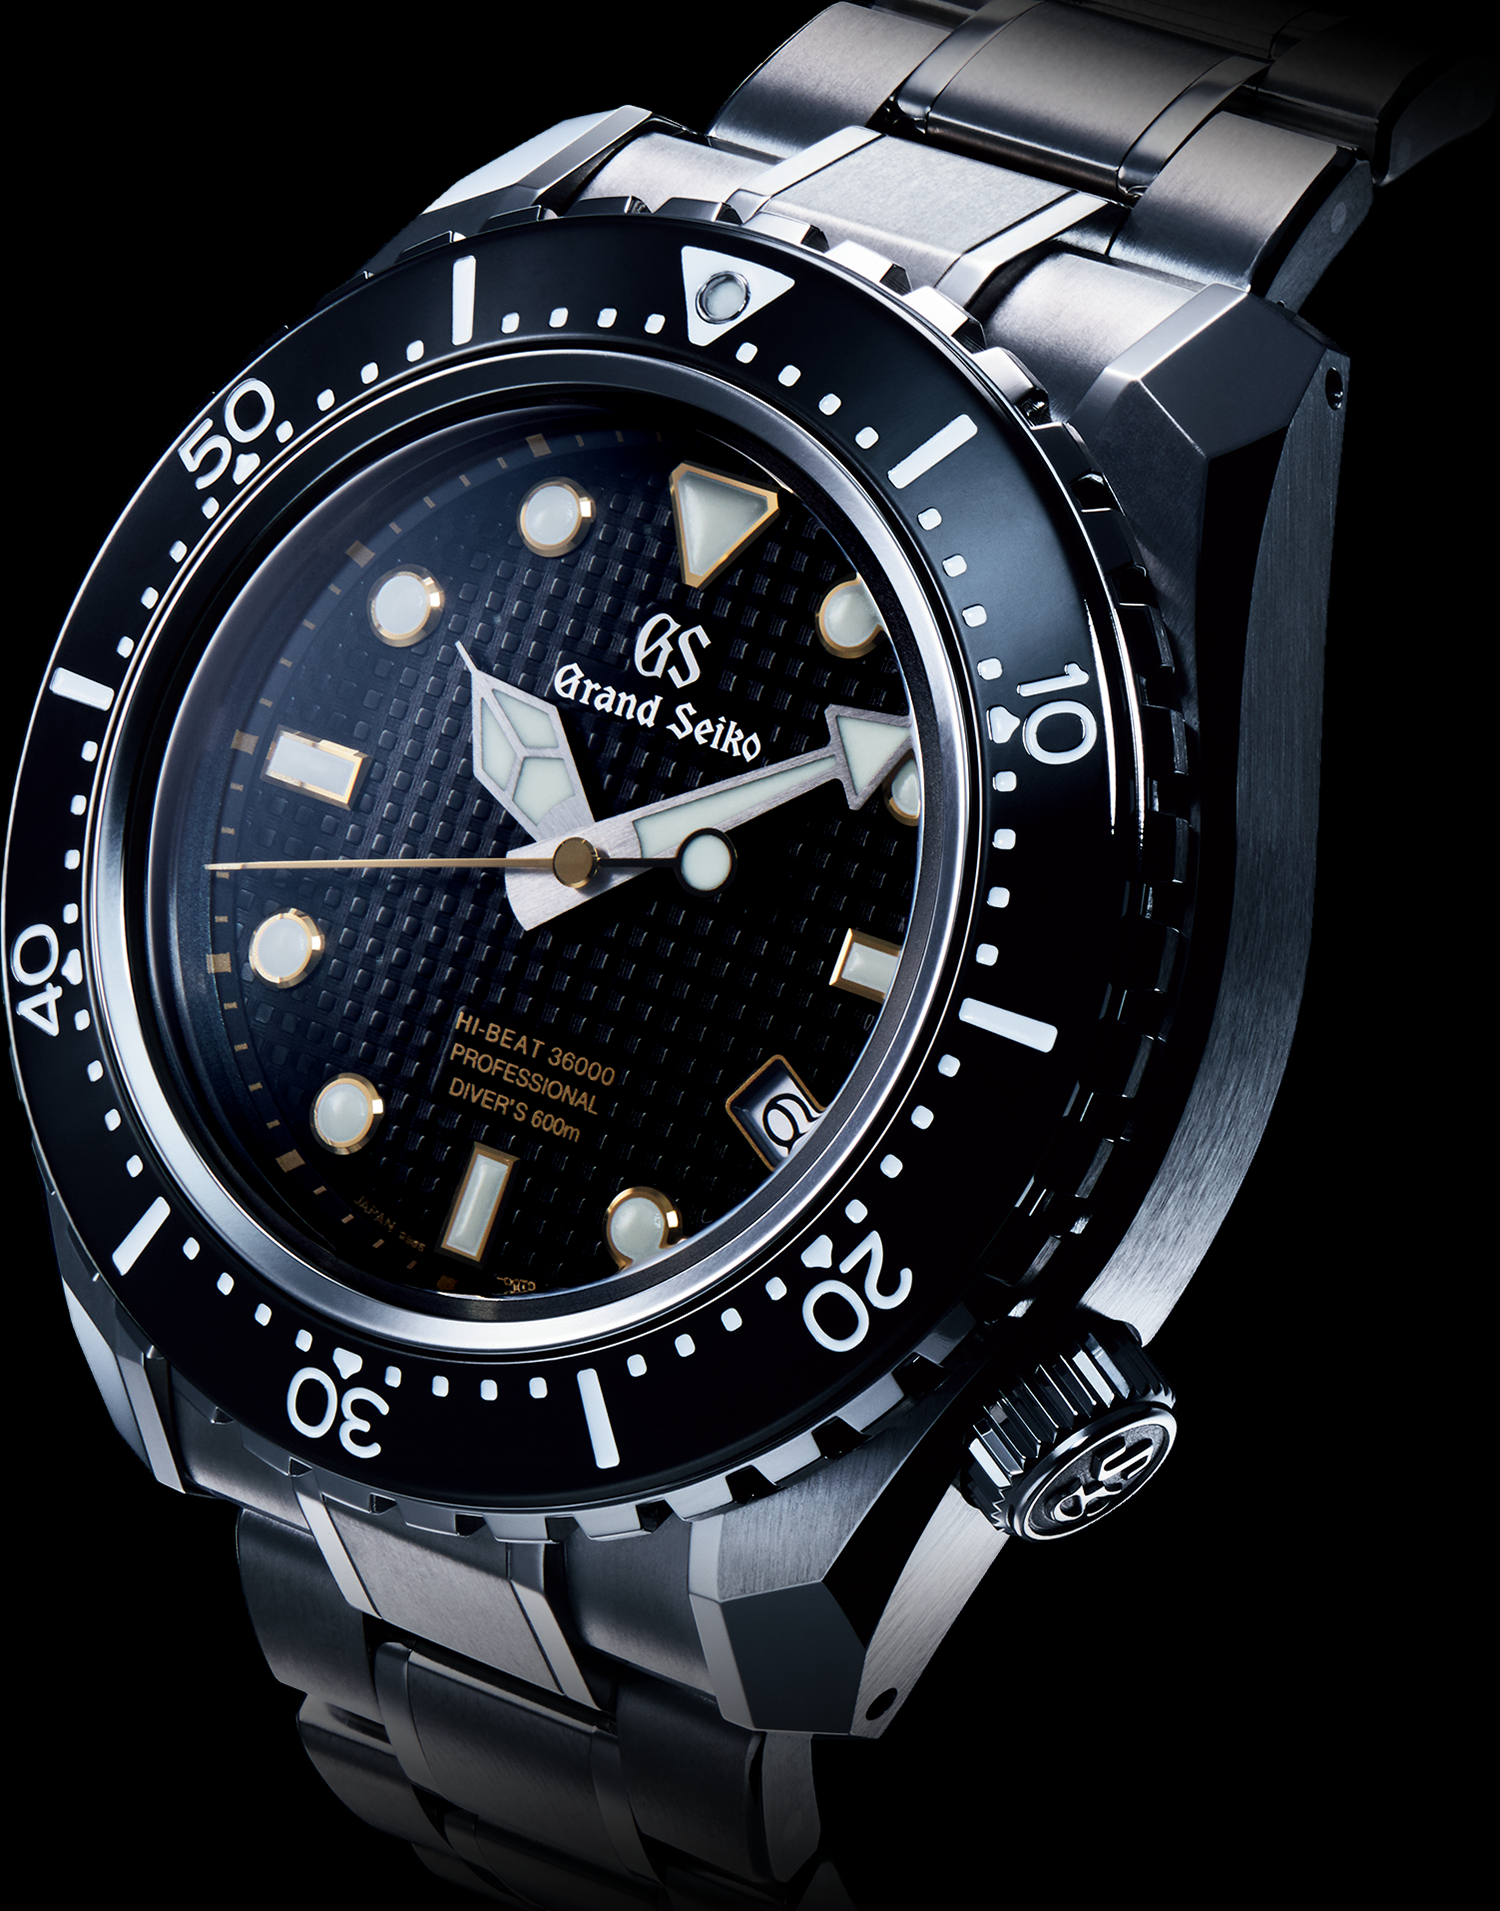 Grand Seiko Hi-Beat 36000 Professional 600m Divers — The Watch Press -  Luxury Watch News and Reviews